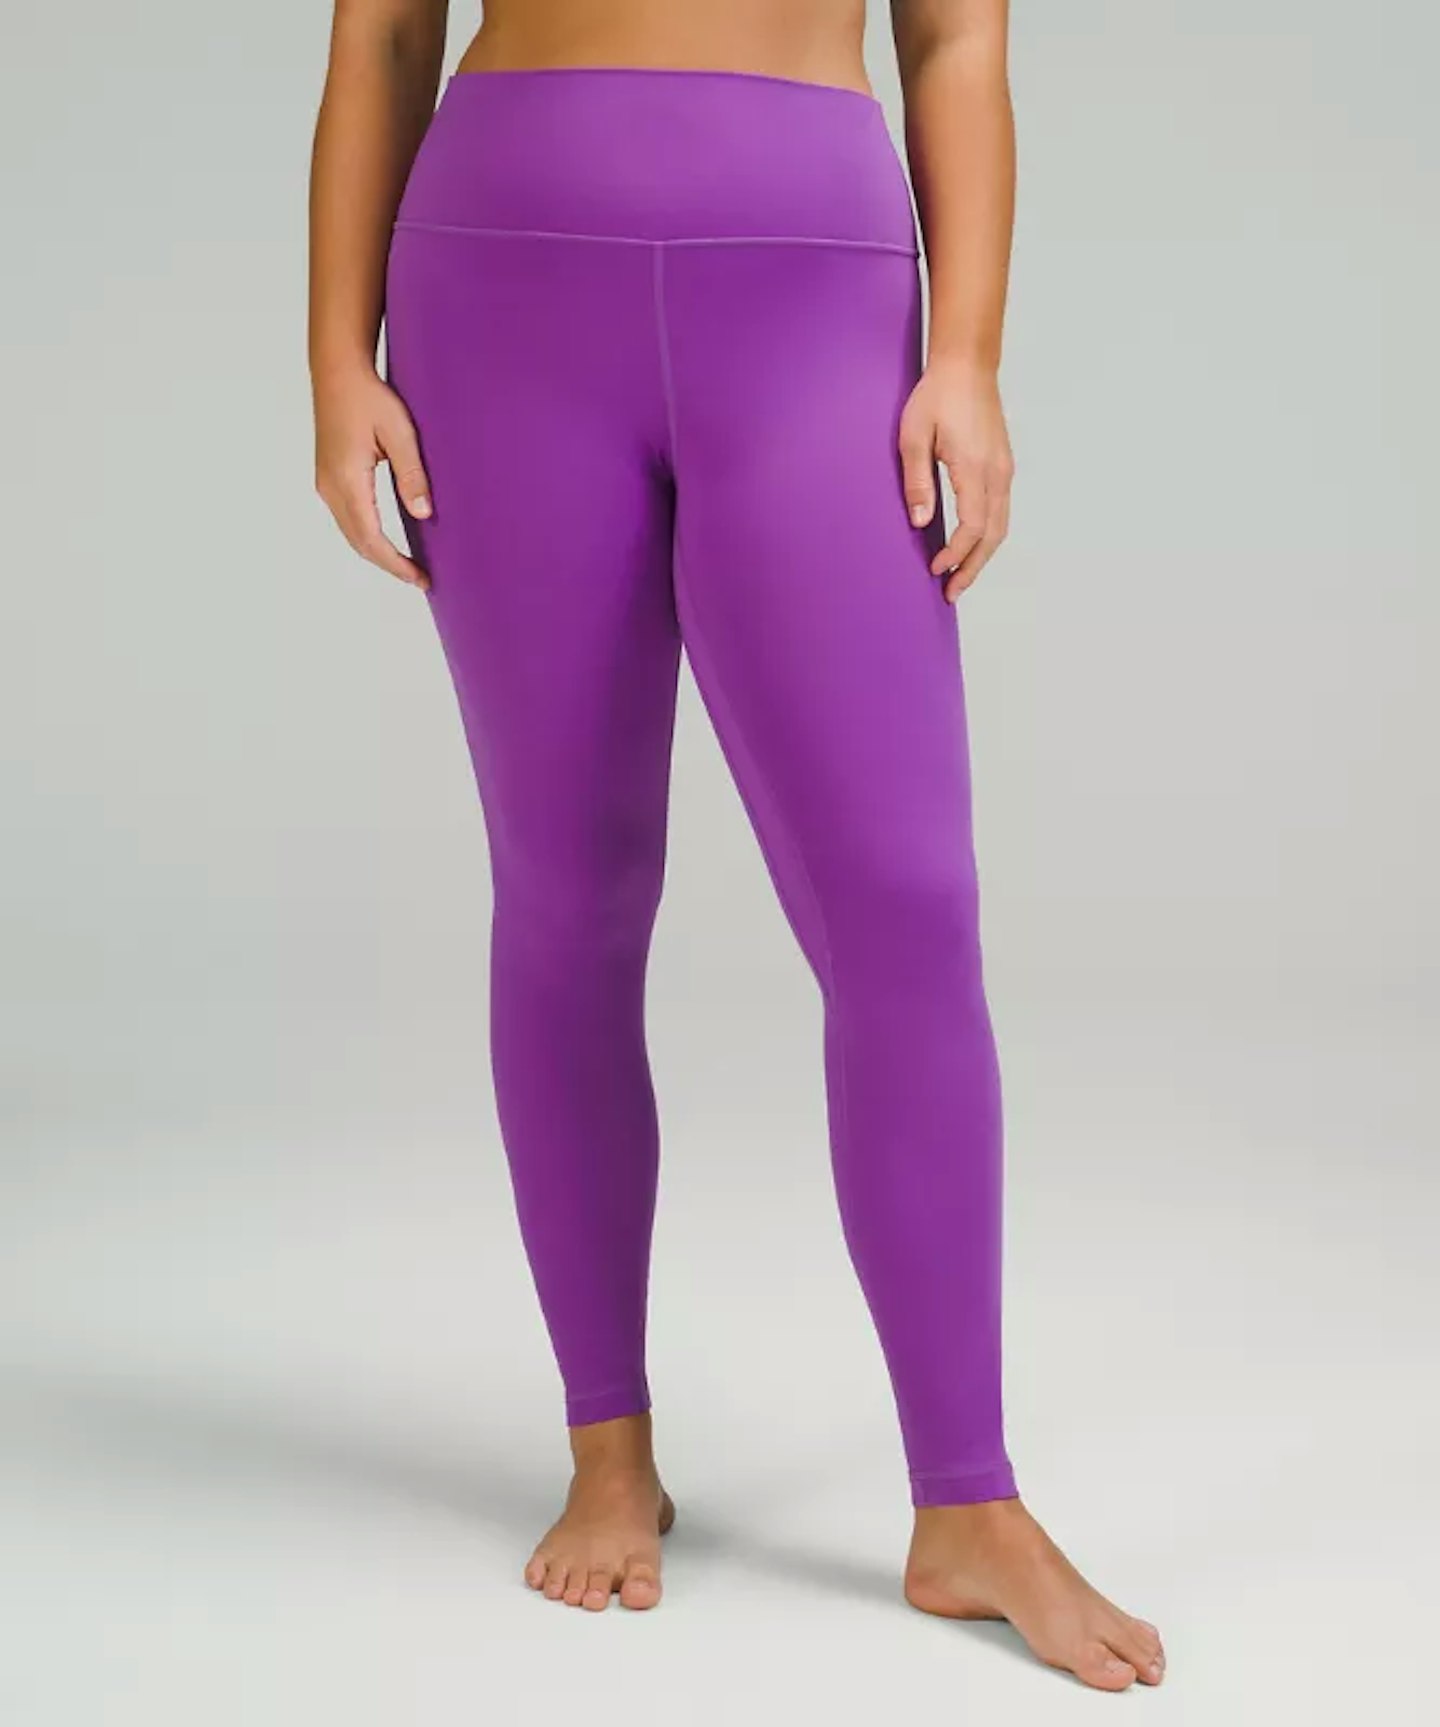 Lululemon Align Leggings: Are They Worth Buying? Here's Our Honest